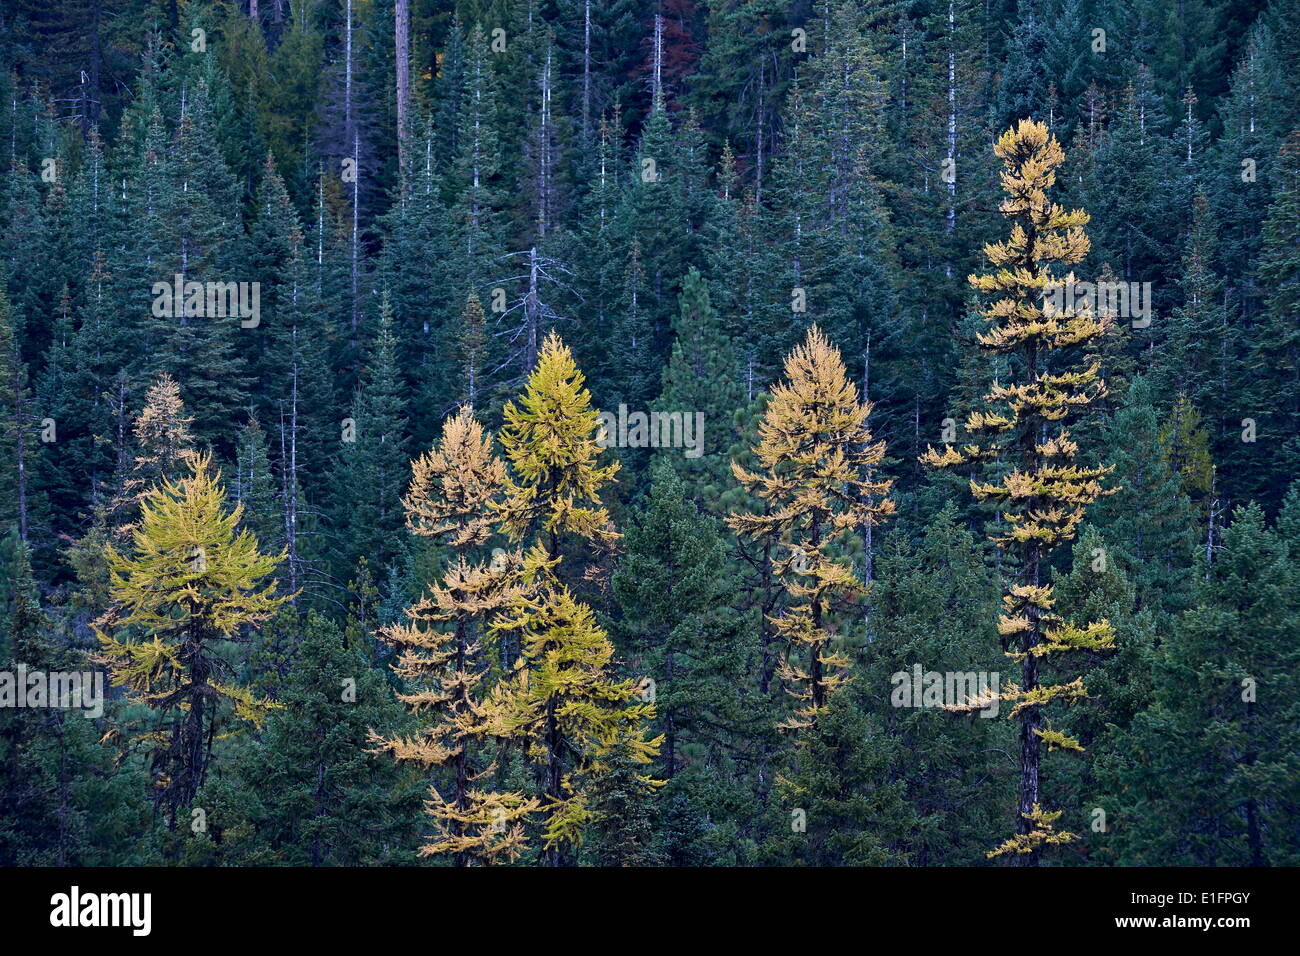 Western larch (Larix occidentalis) in the fall, Mount Hood National Forest, Oregon, United States of America, North America Stock Photo